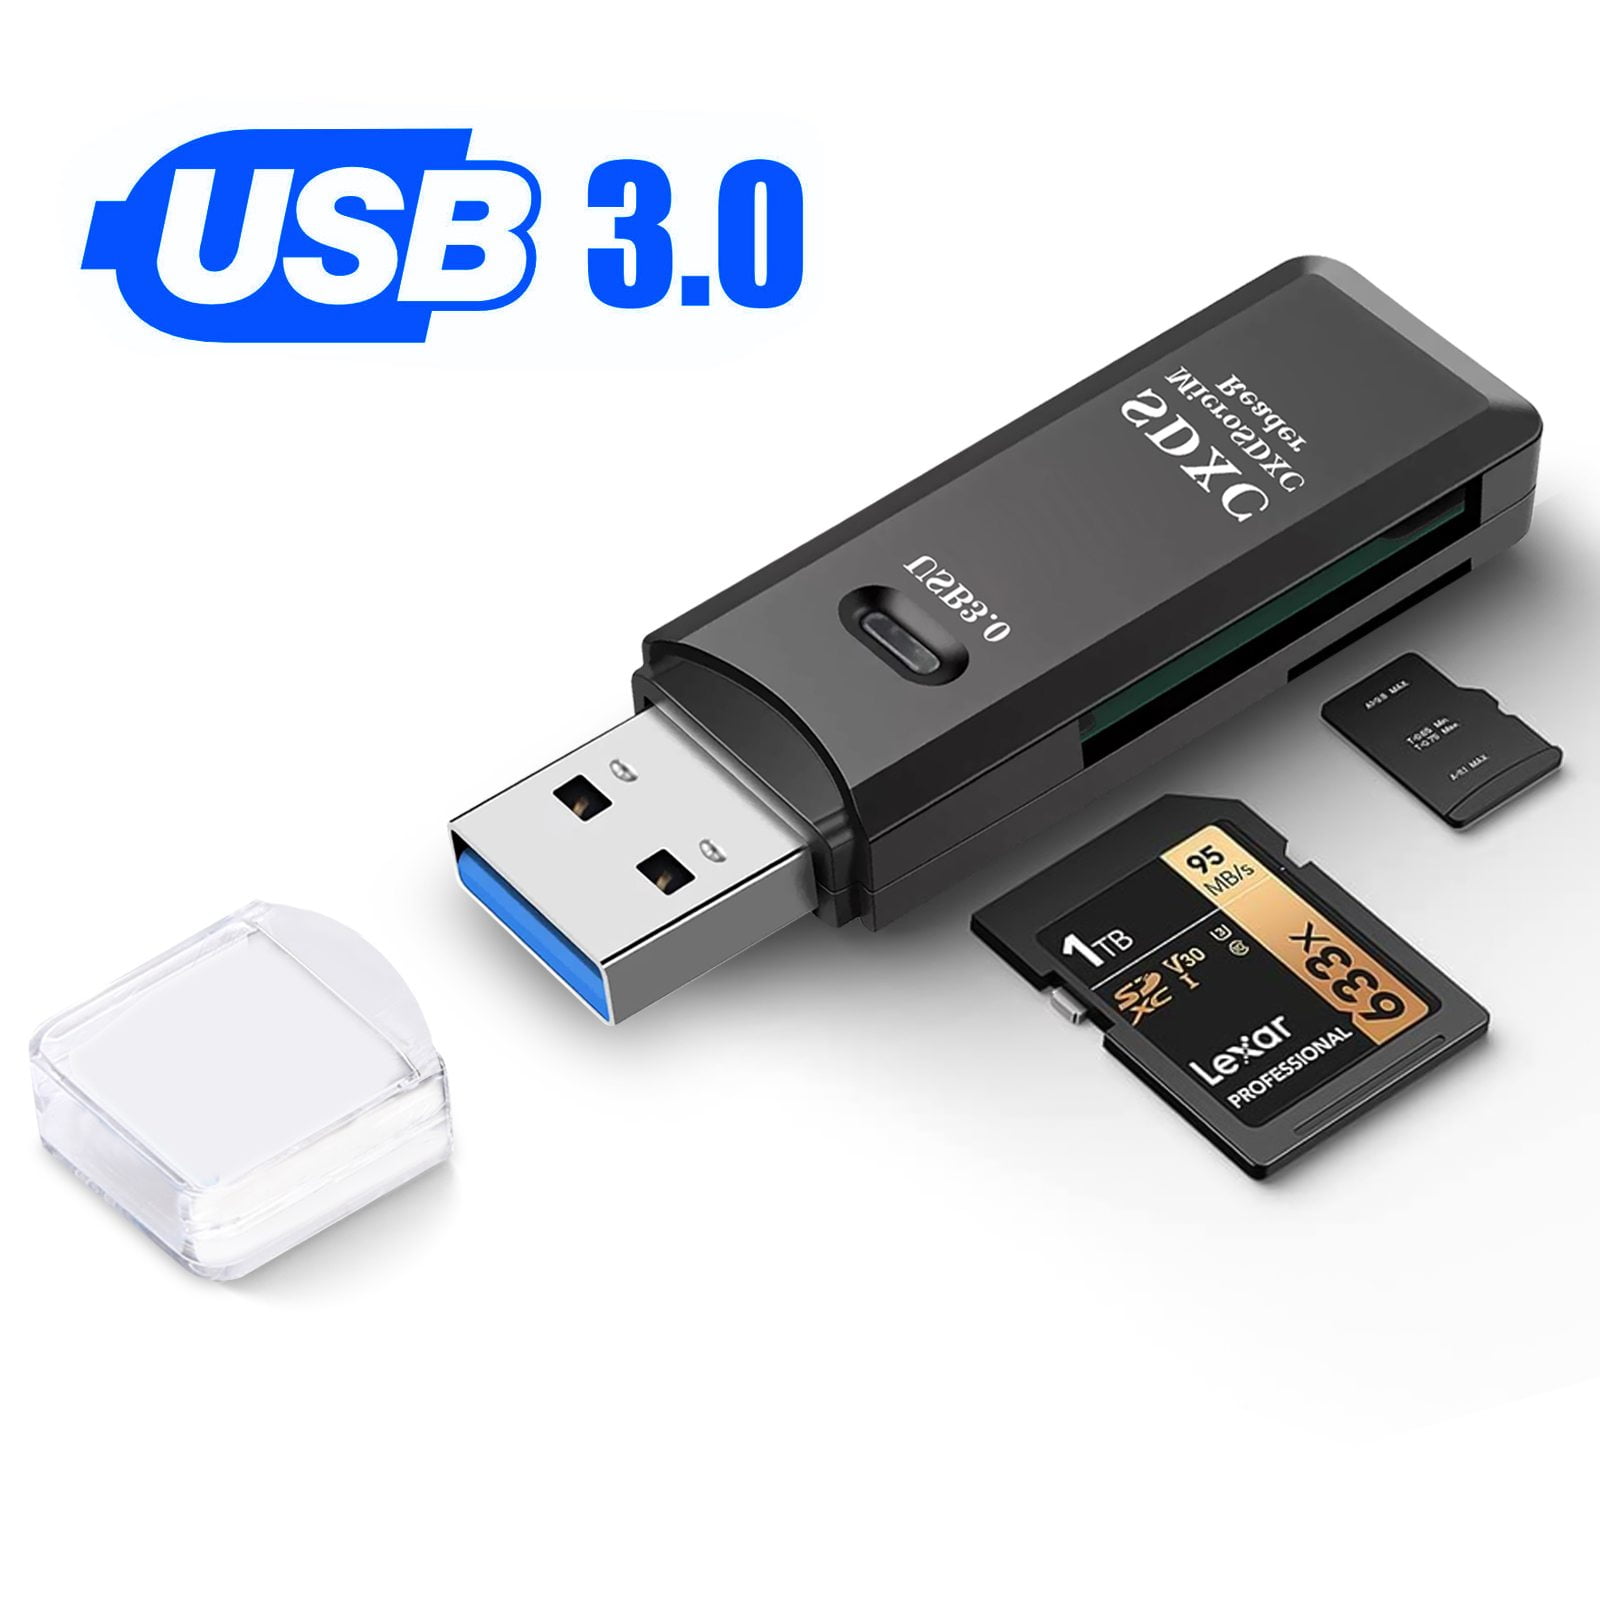 NEW Micro SD to USB Memory Card Adapter Reader Dongle US SELLER FAST SHIPPING!!! 